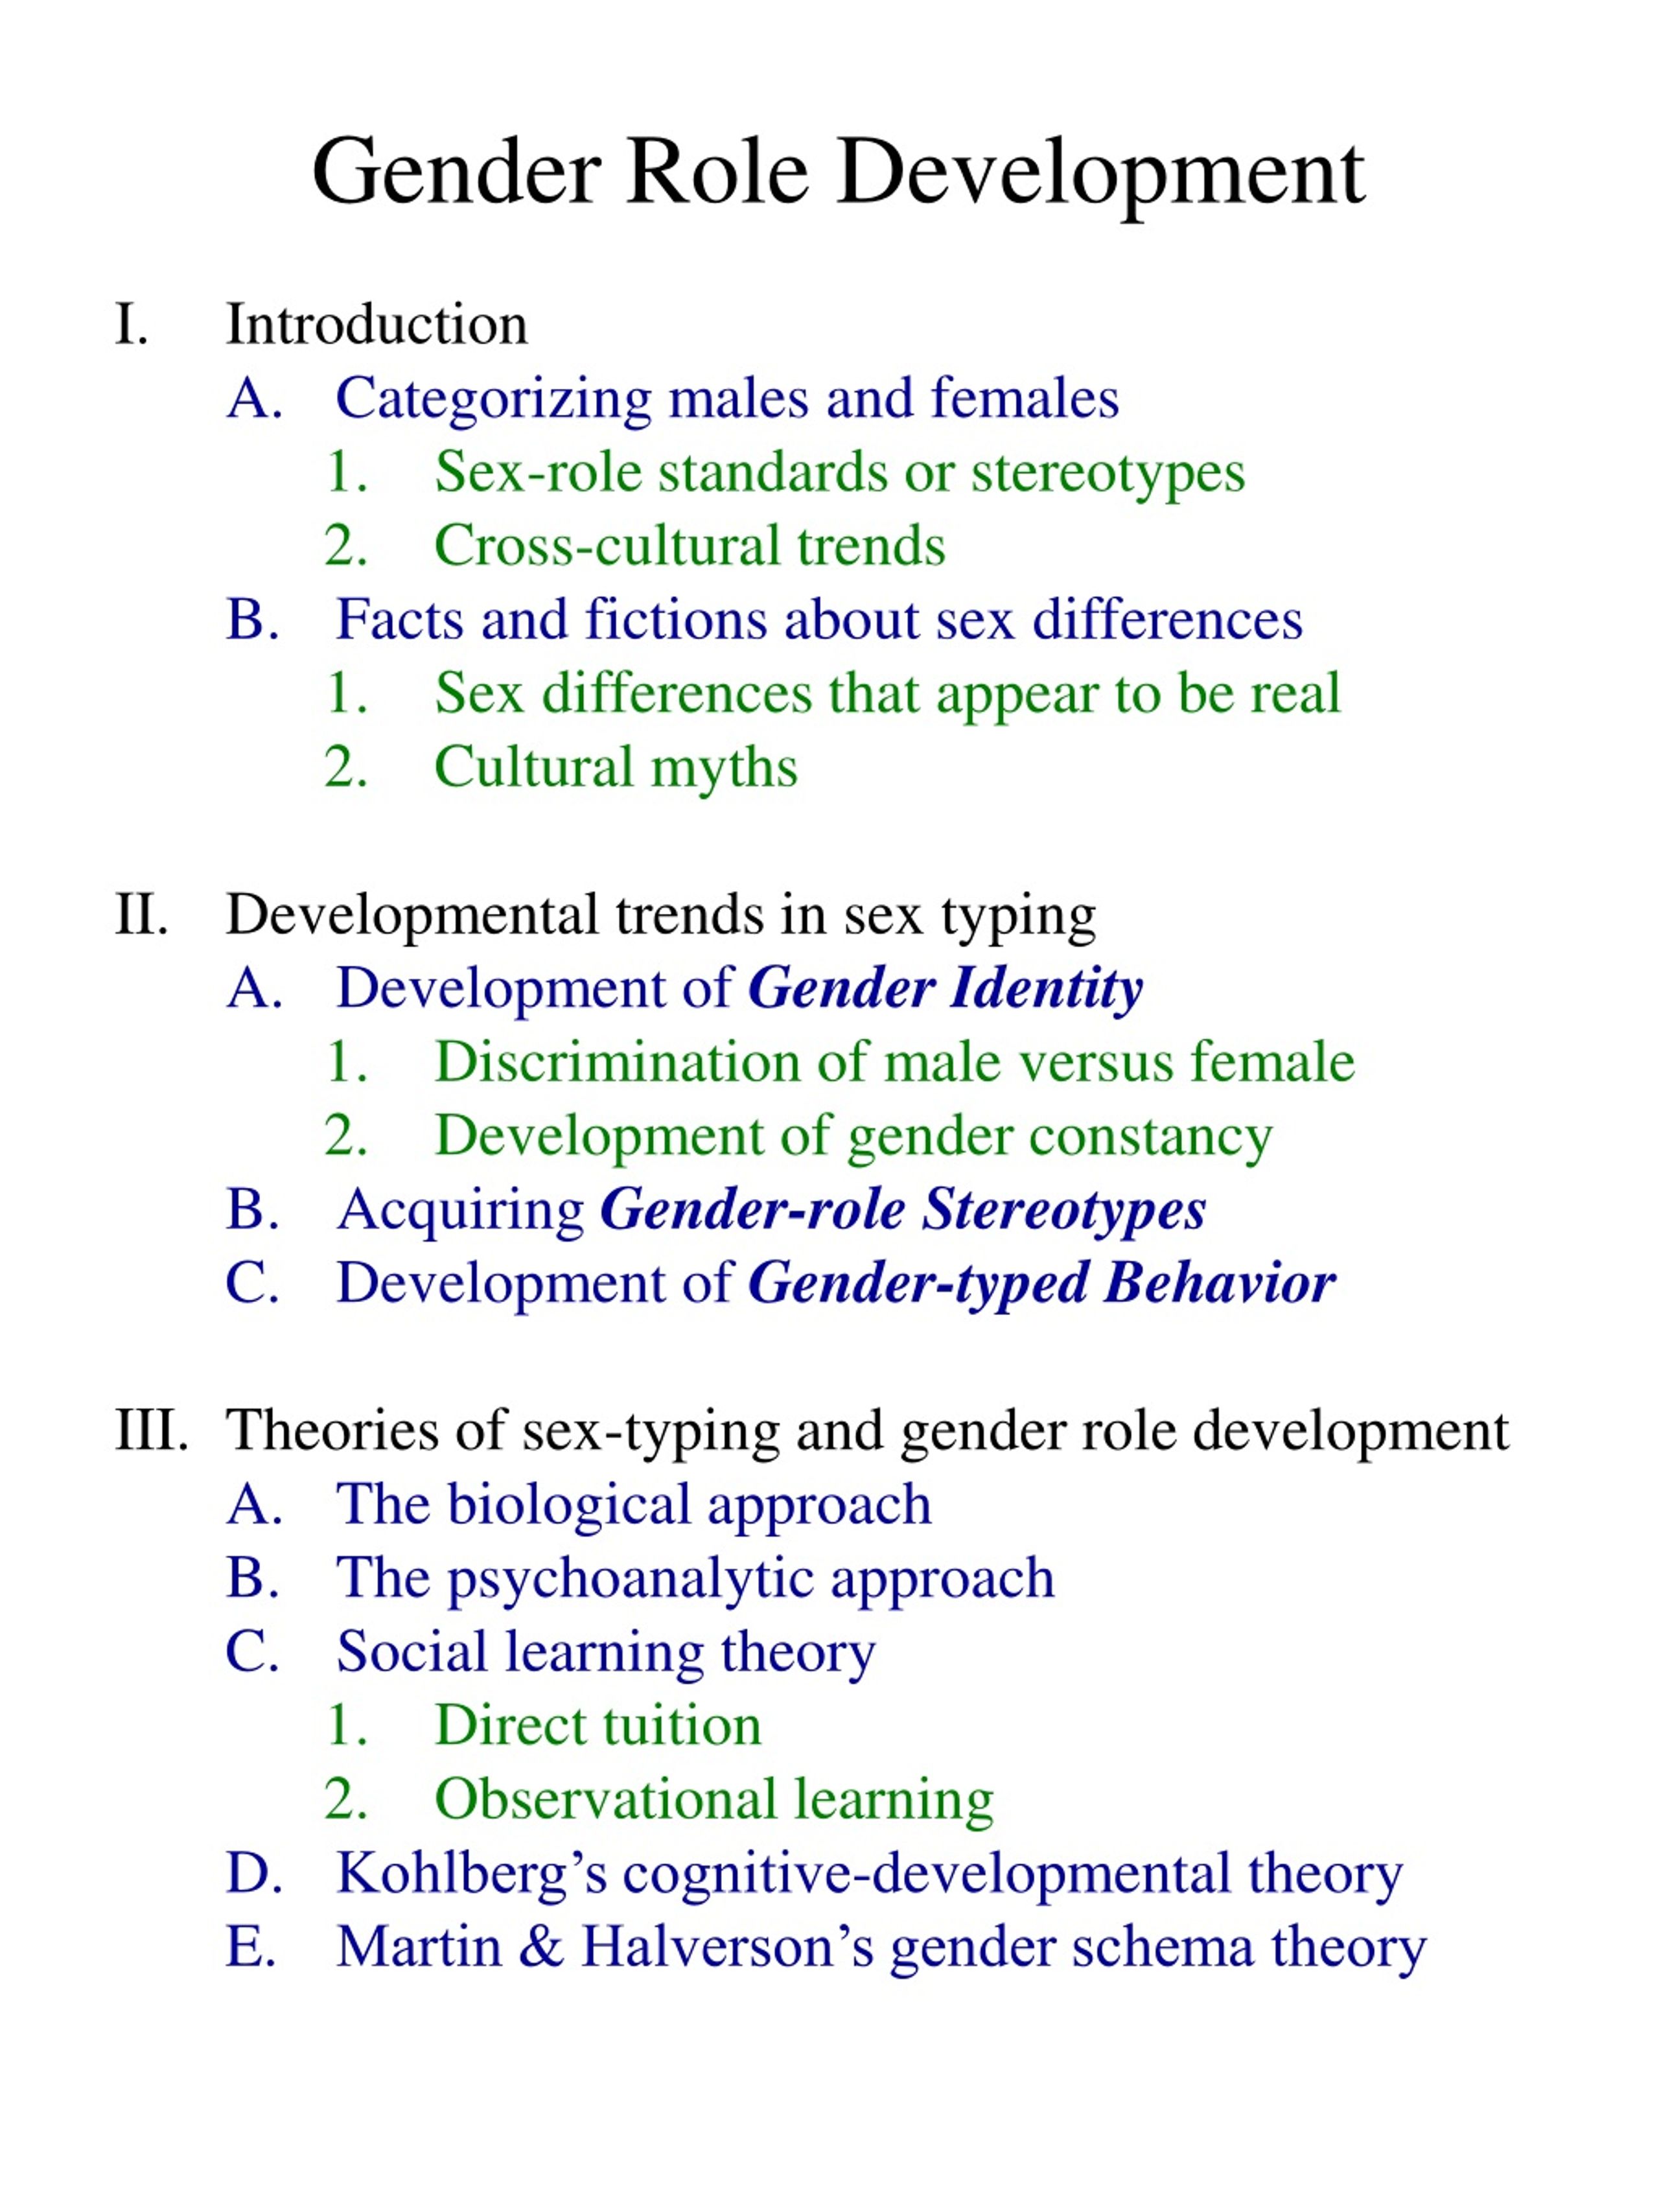 research paper about gender and development